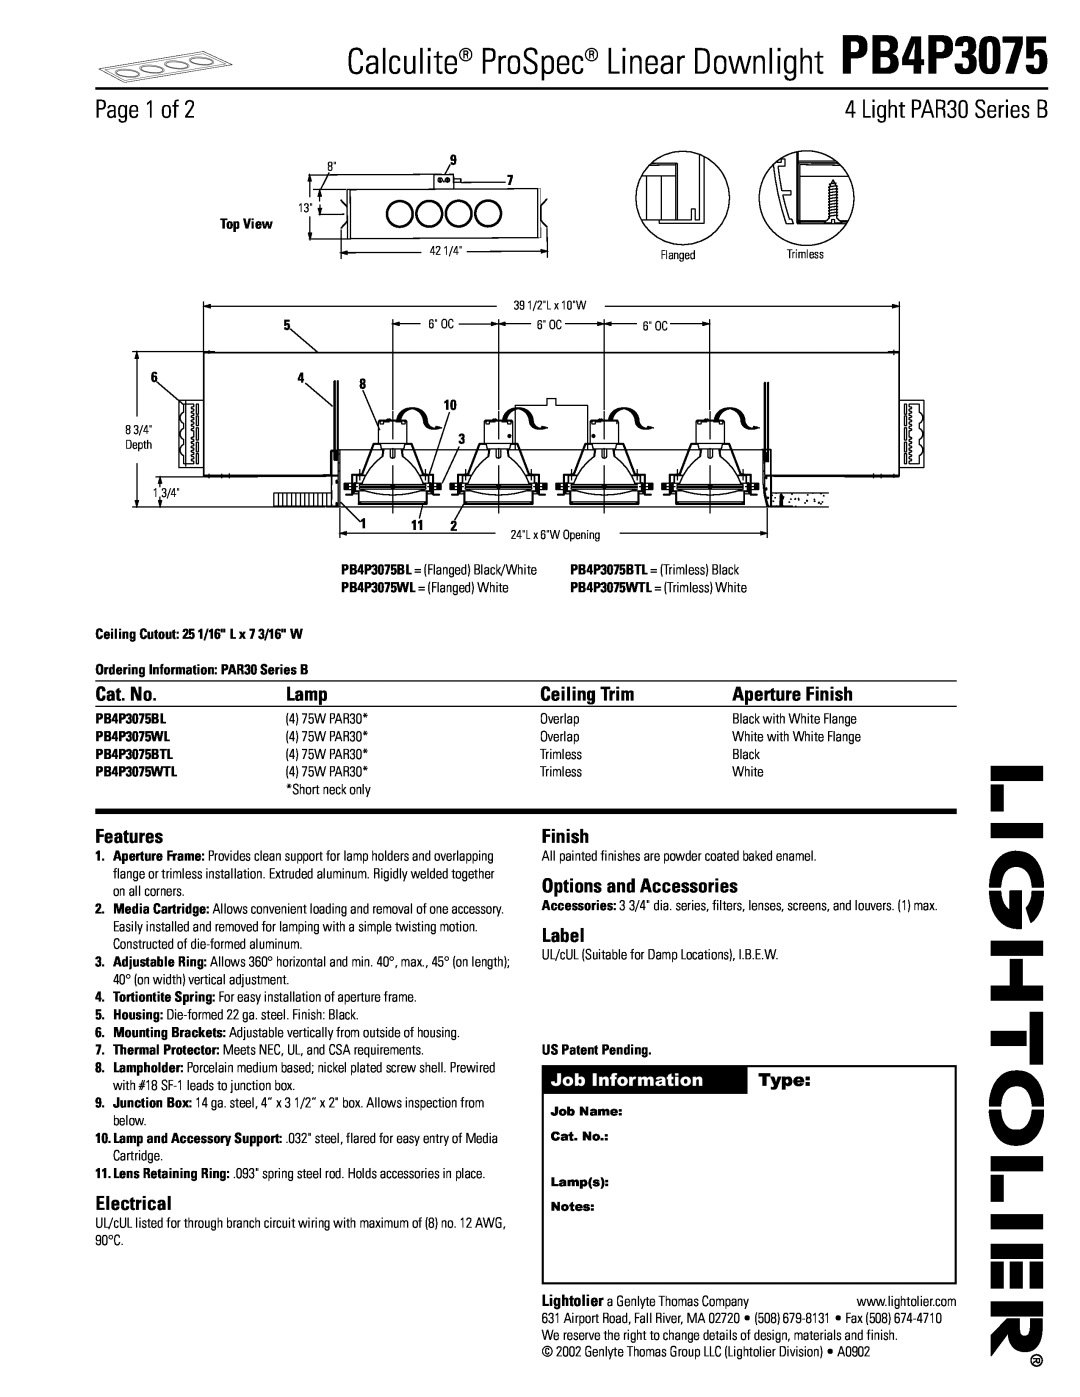 Lightolier PB4P3075 manual Cat. No, Lamp, Aperture Finish, Features, Electrical, Options and Accessories, Label, Type 